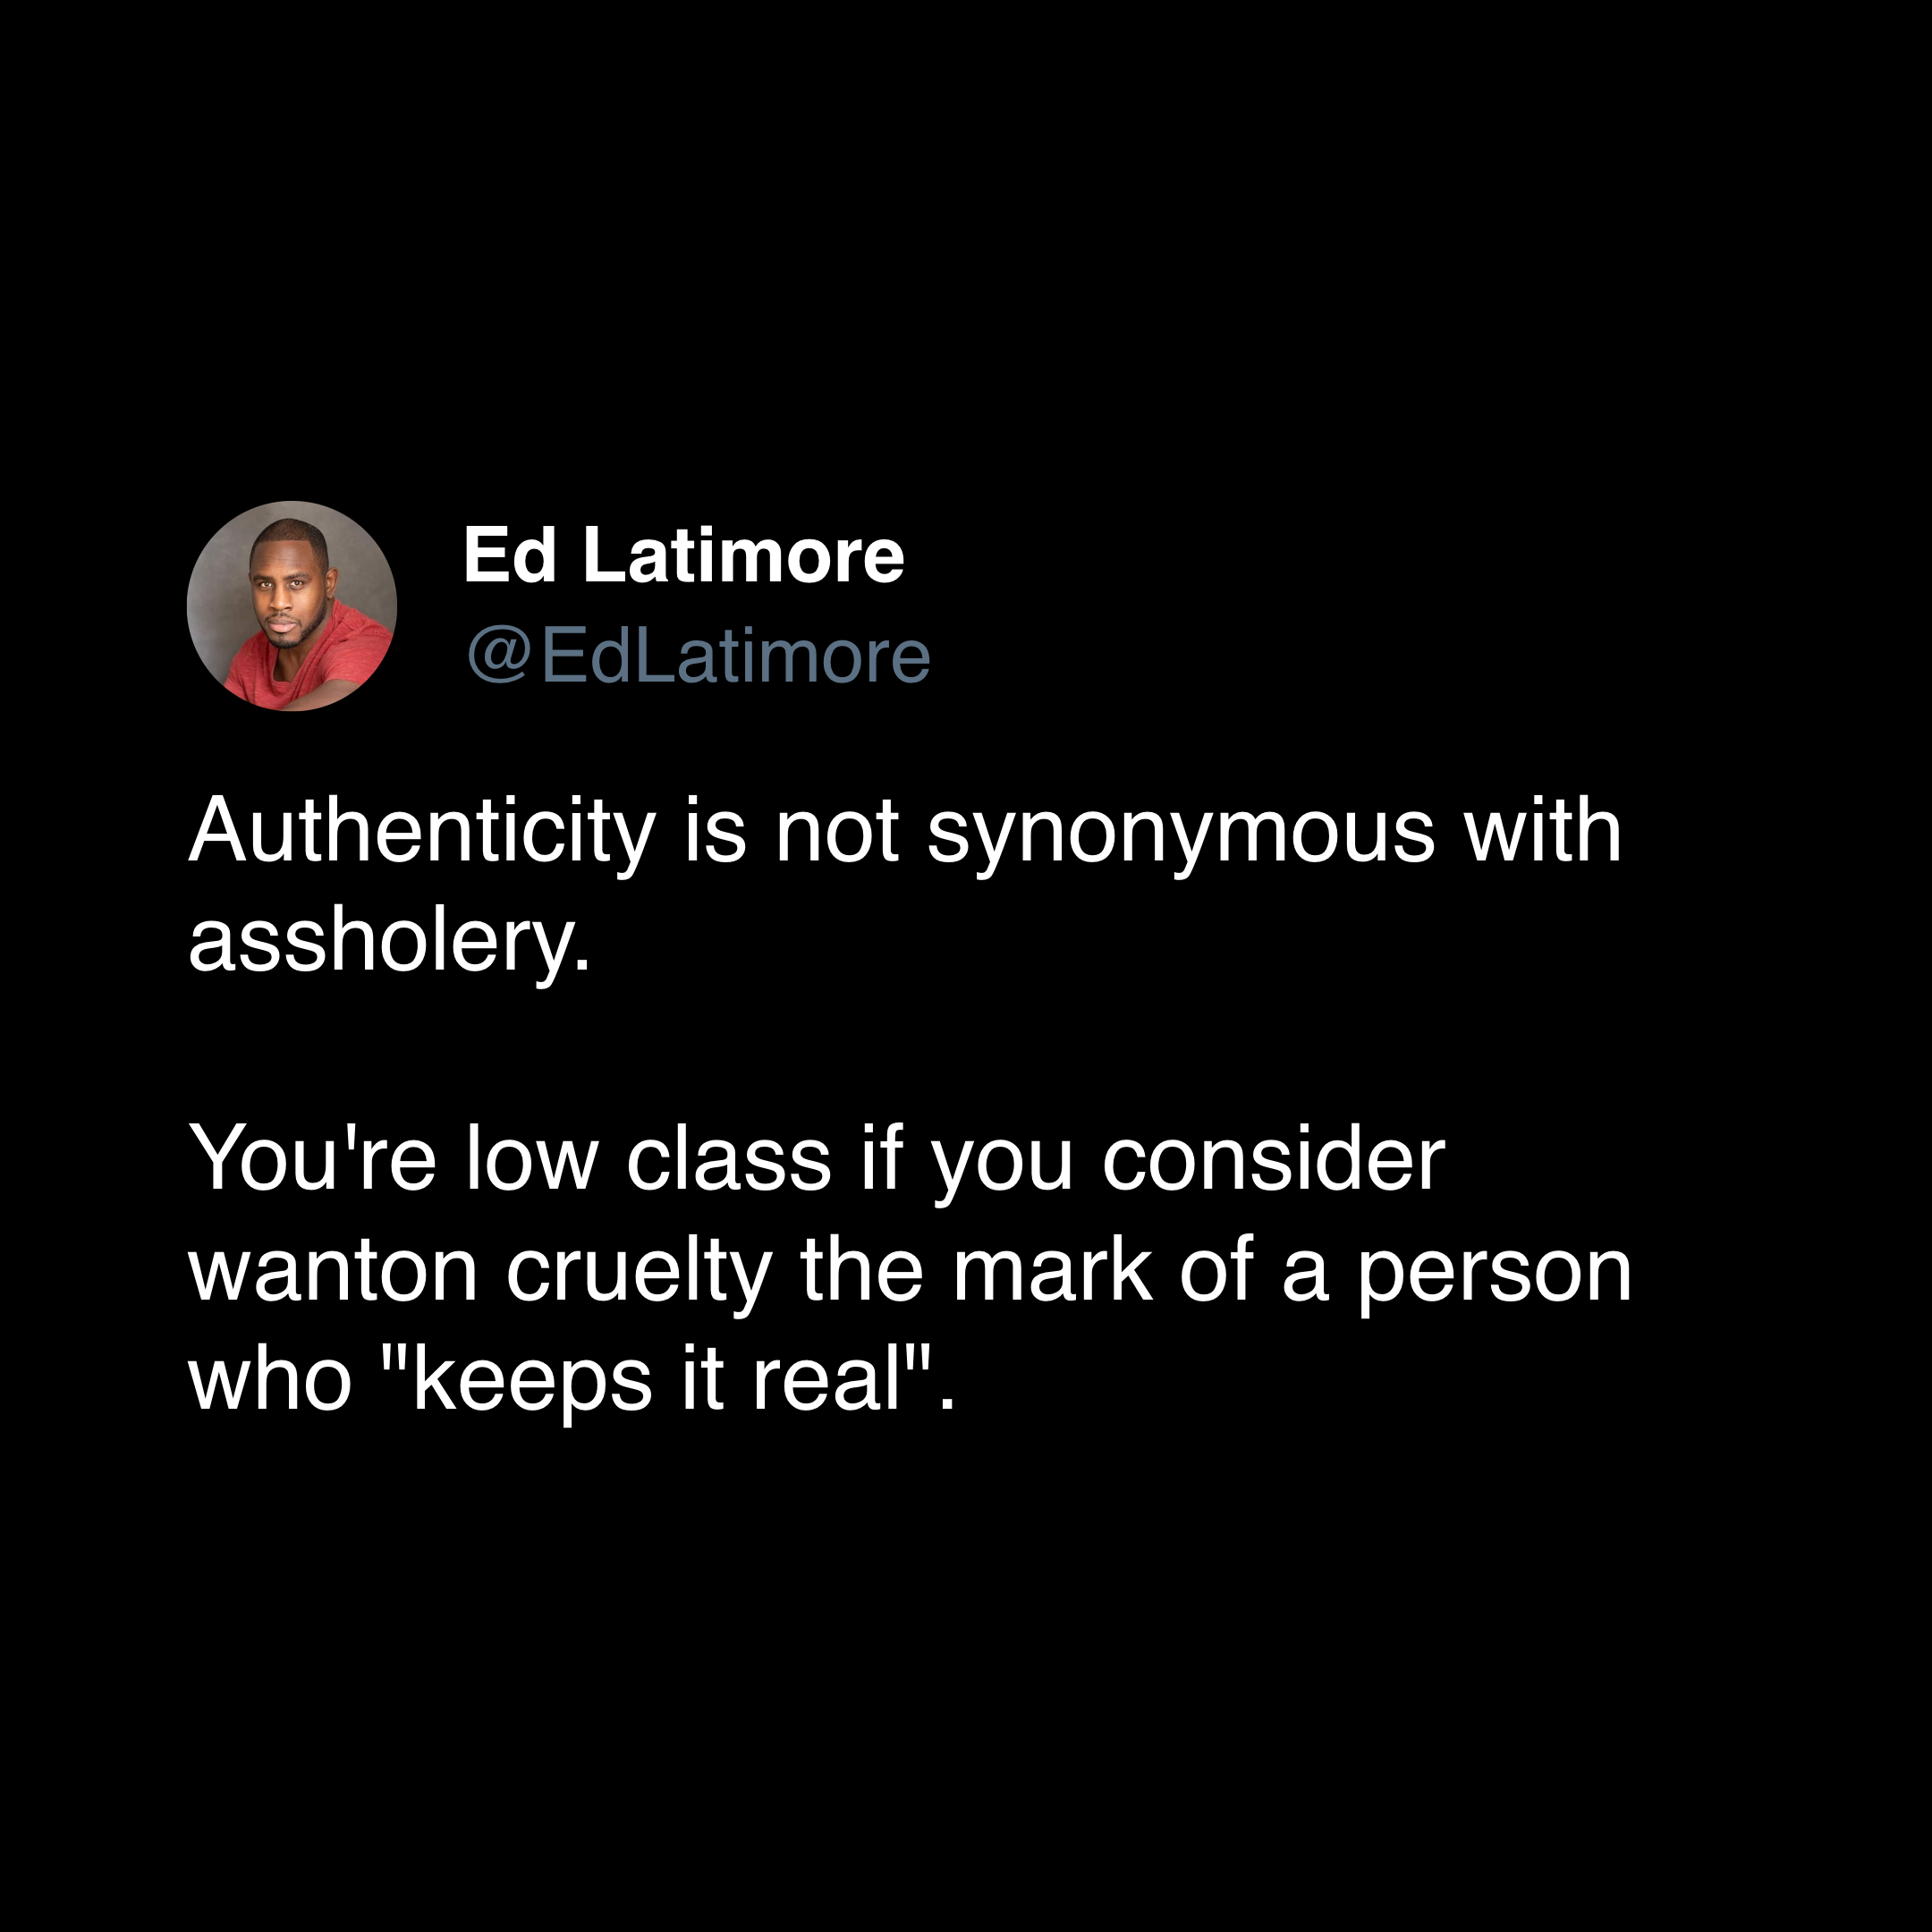 ed latimore authenticity quotes "authenticity is not being an asshole"